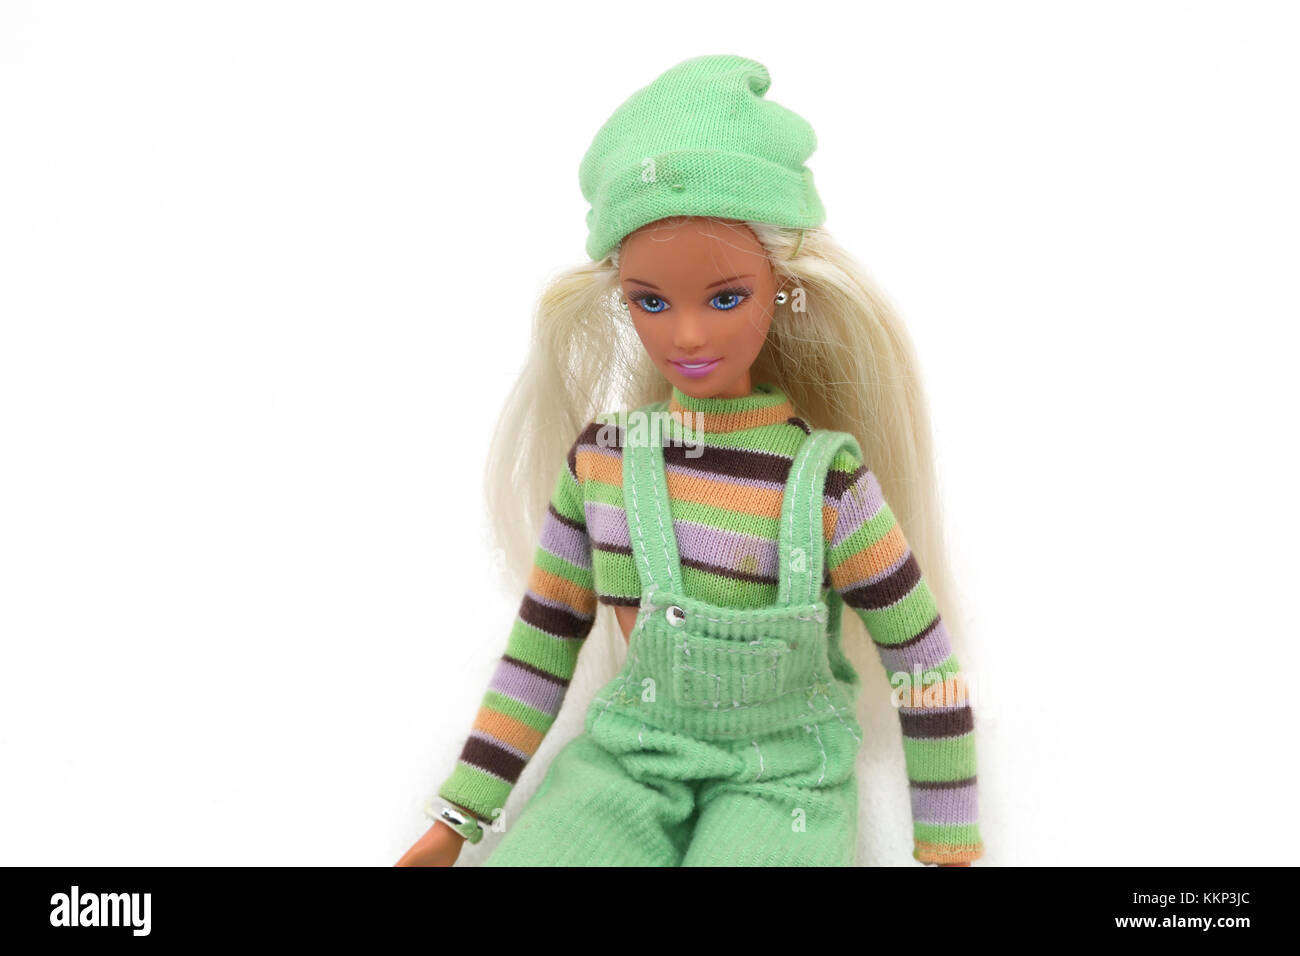 Skipper Doll High Resolution Stock Photography and Images - Alamy